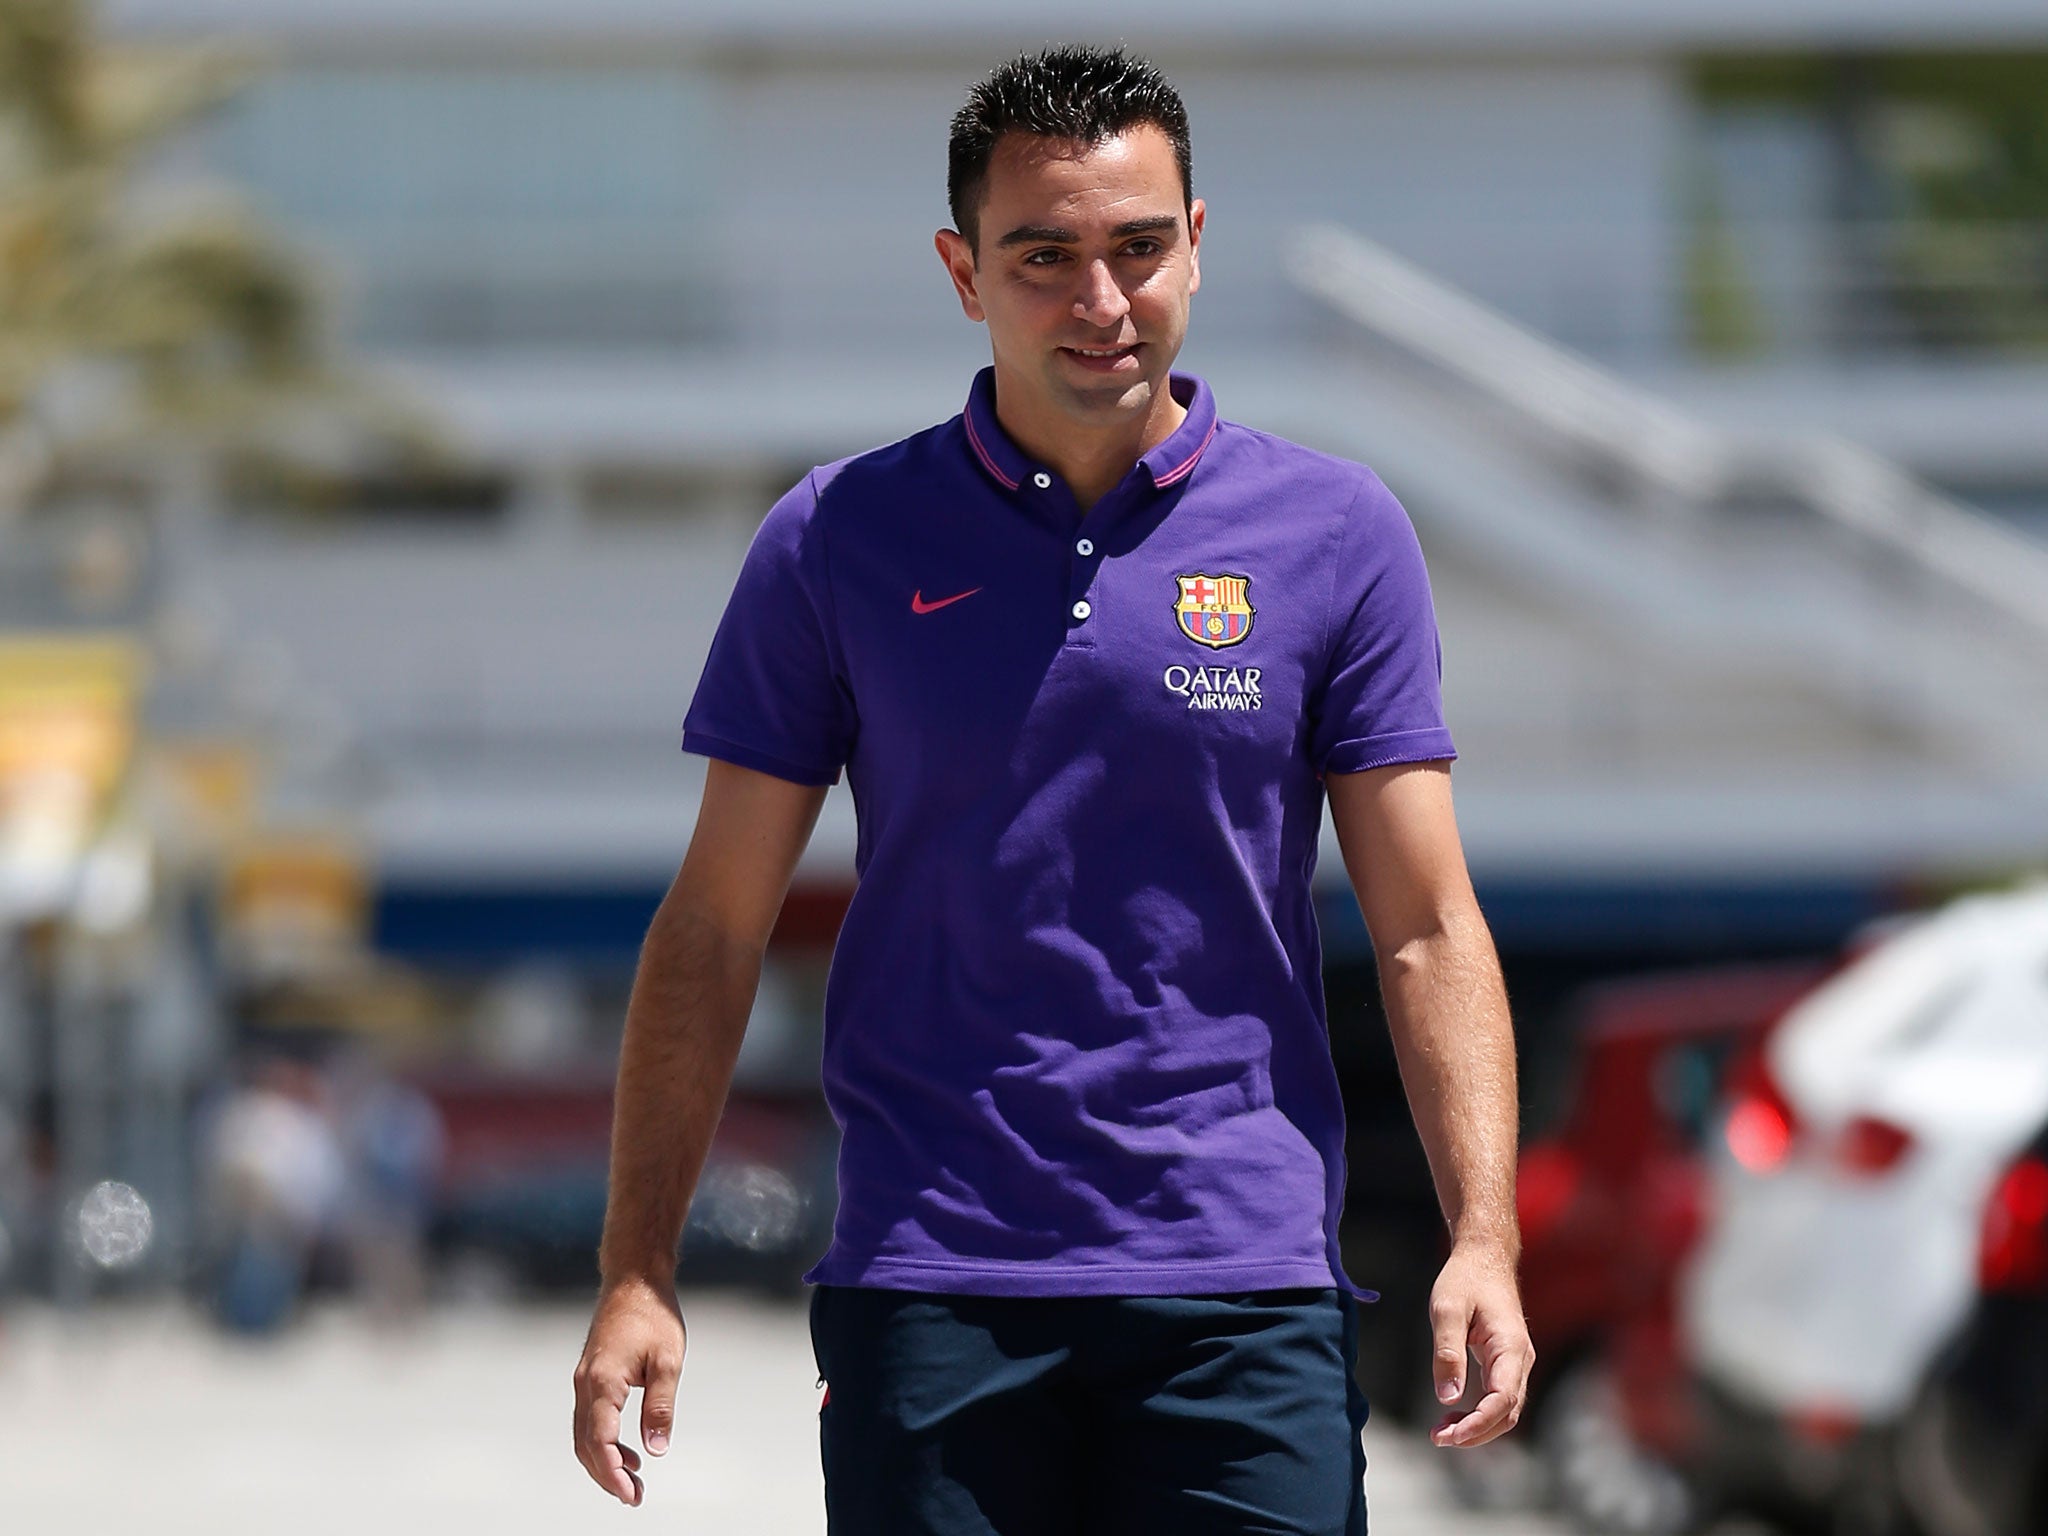 Fromer Barcelona captain Xavi Hernandez has denied claims attached to him